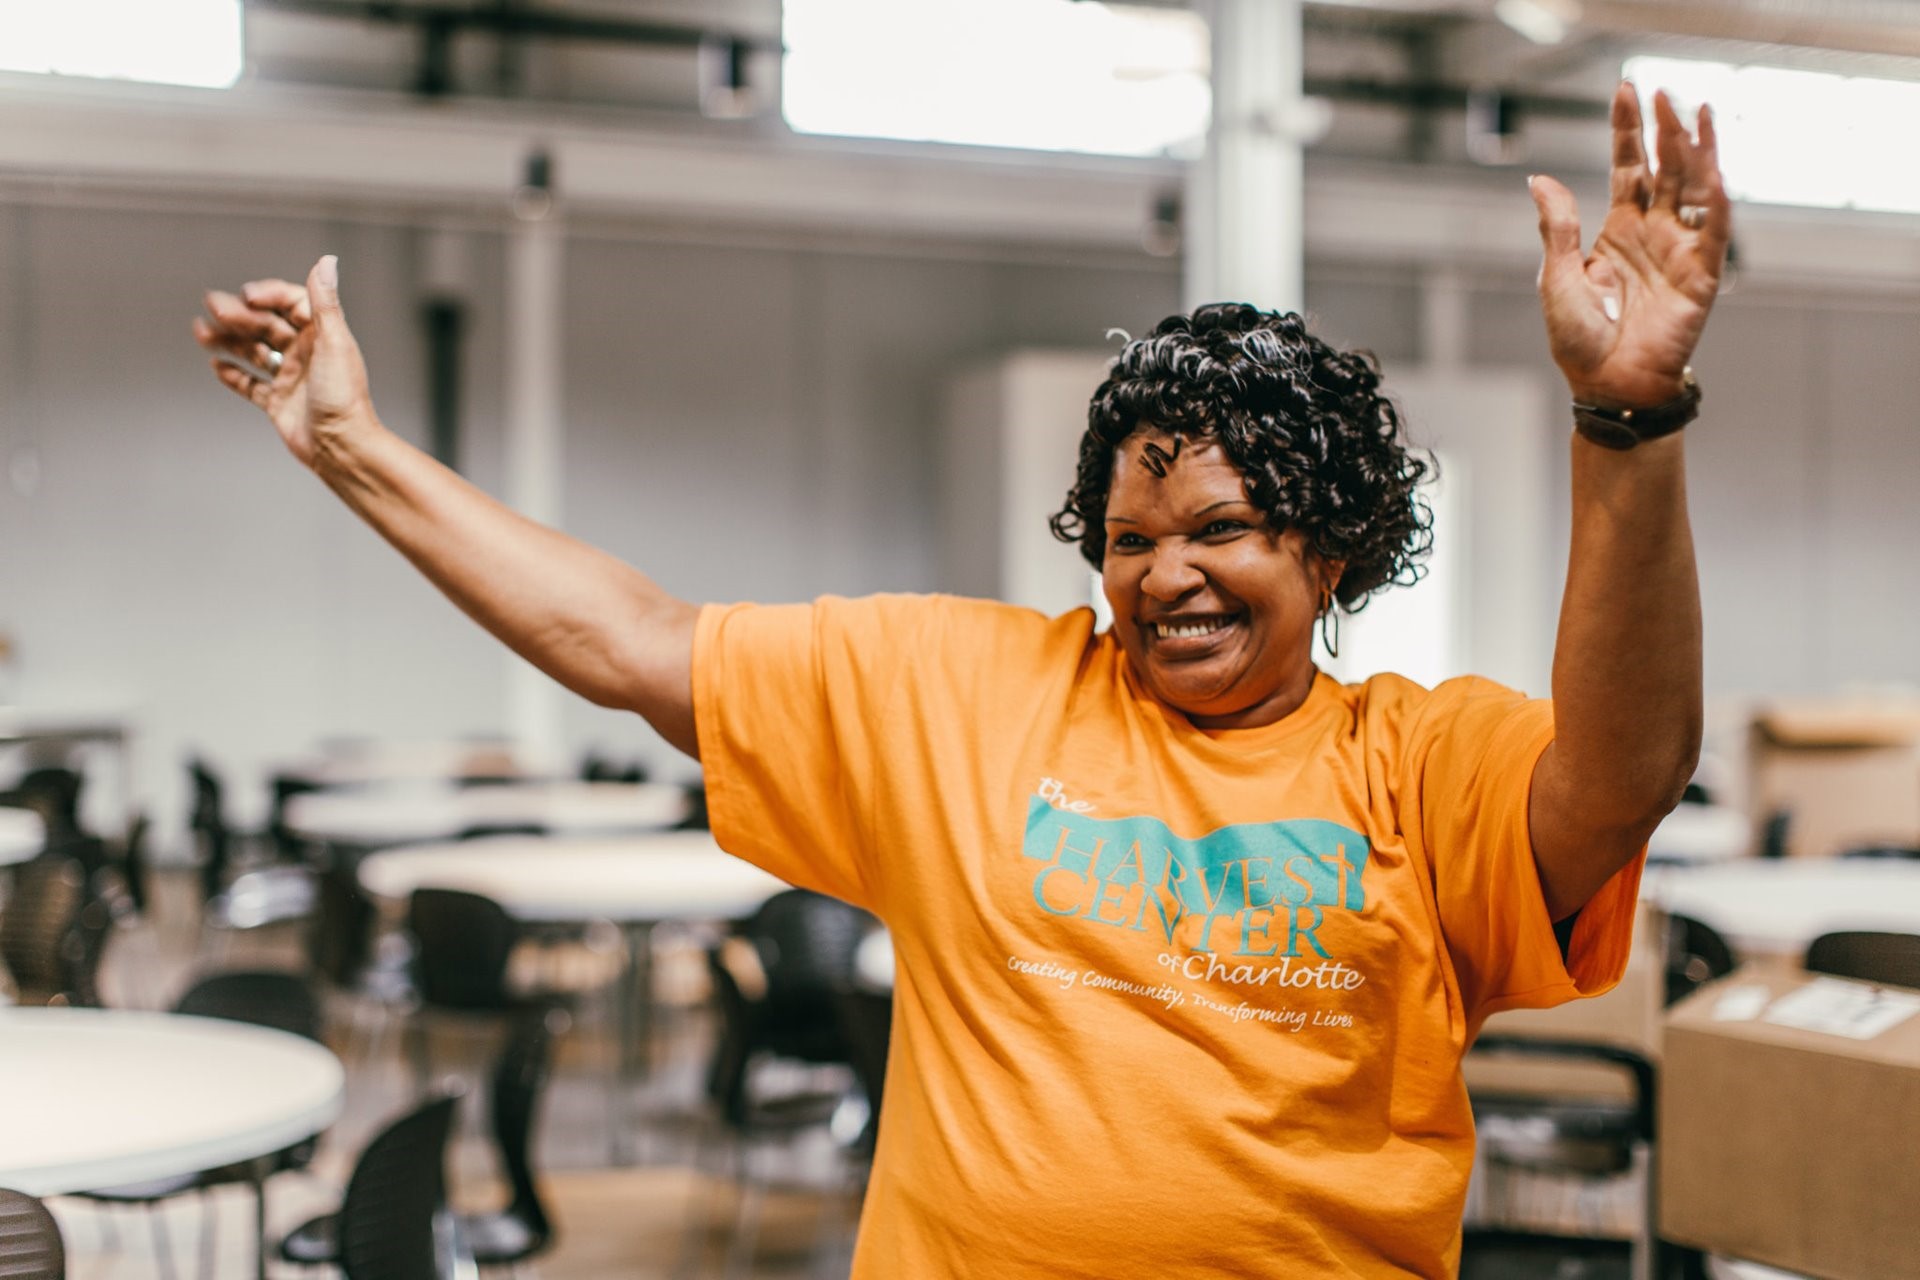 Kitchen manager Isabella Pickett, 66, has worked with the Harvest Center for the last 15 years. She first started volunteering there after she was laid off from her job at a textiles company.